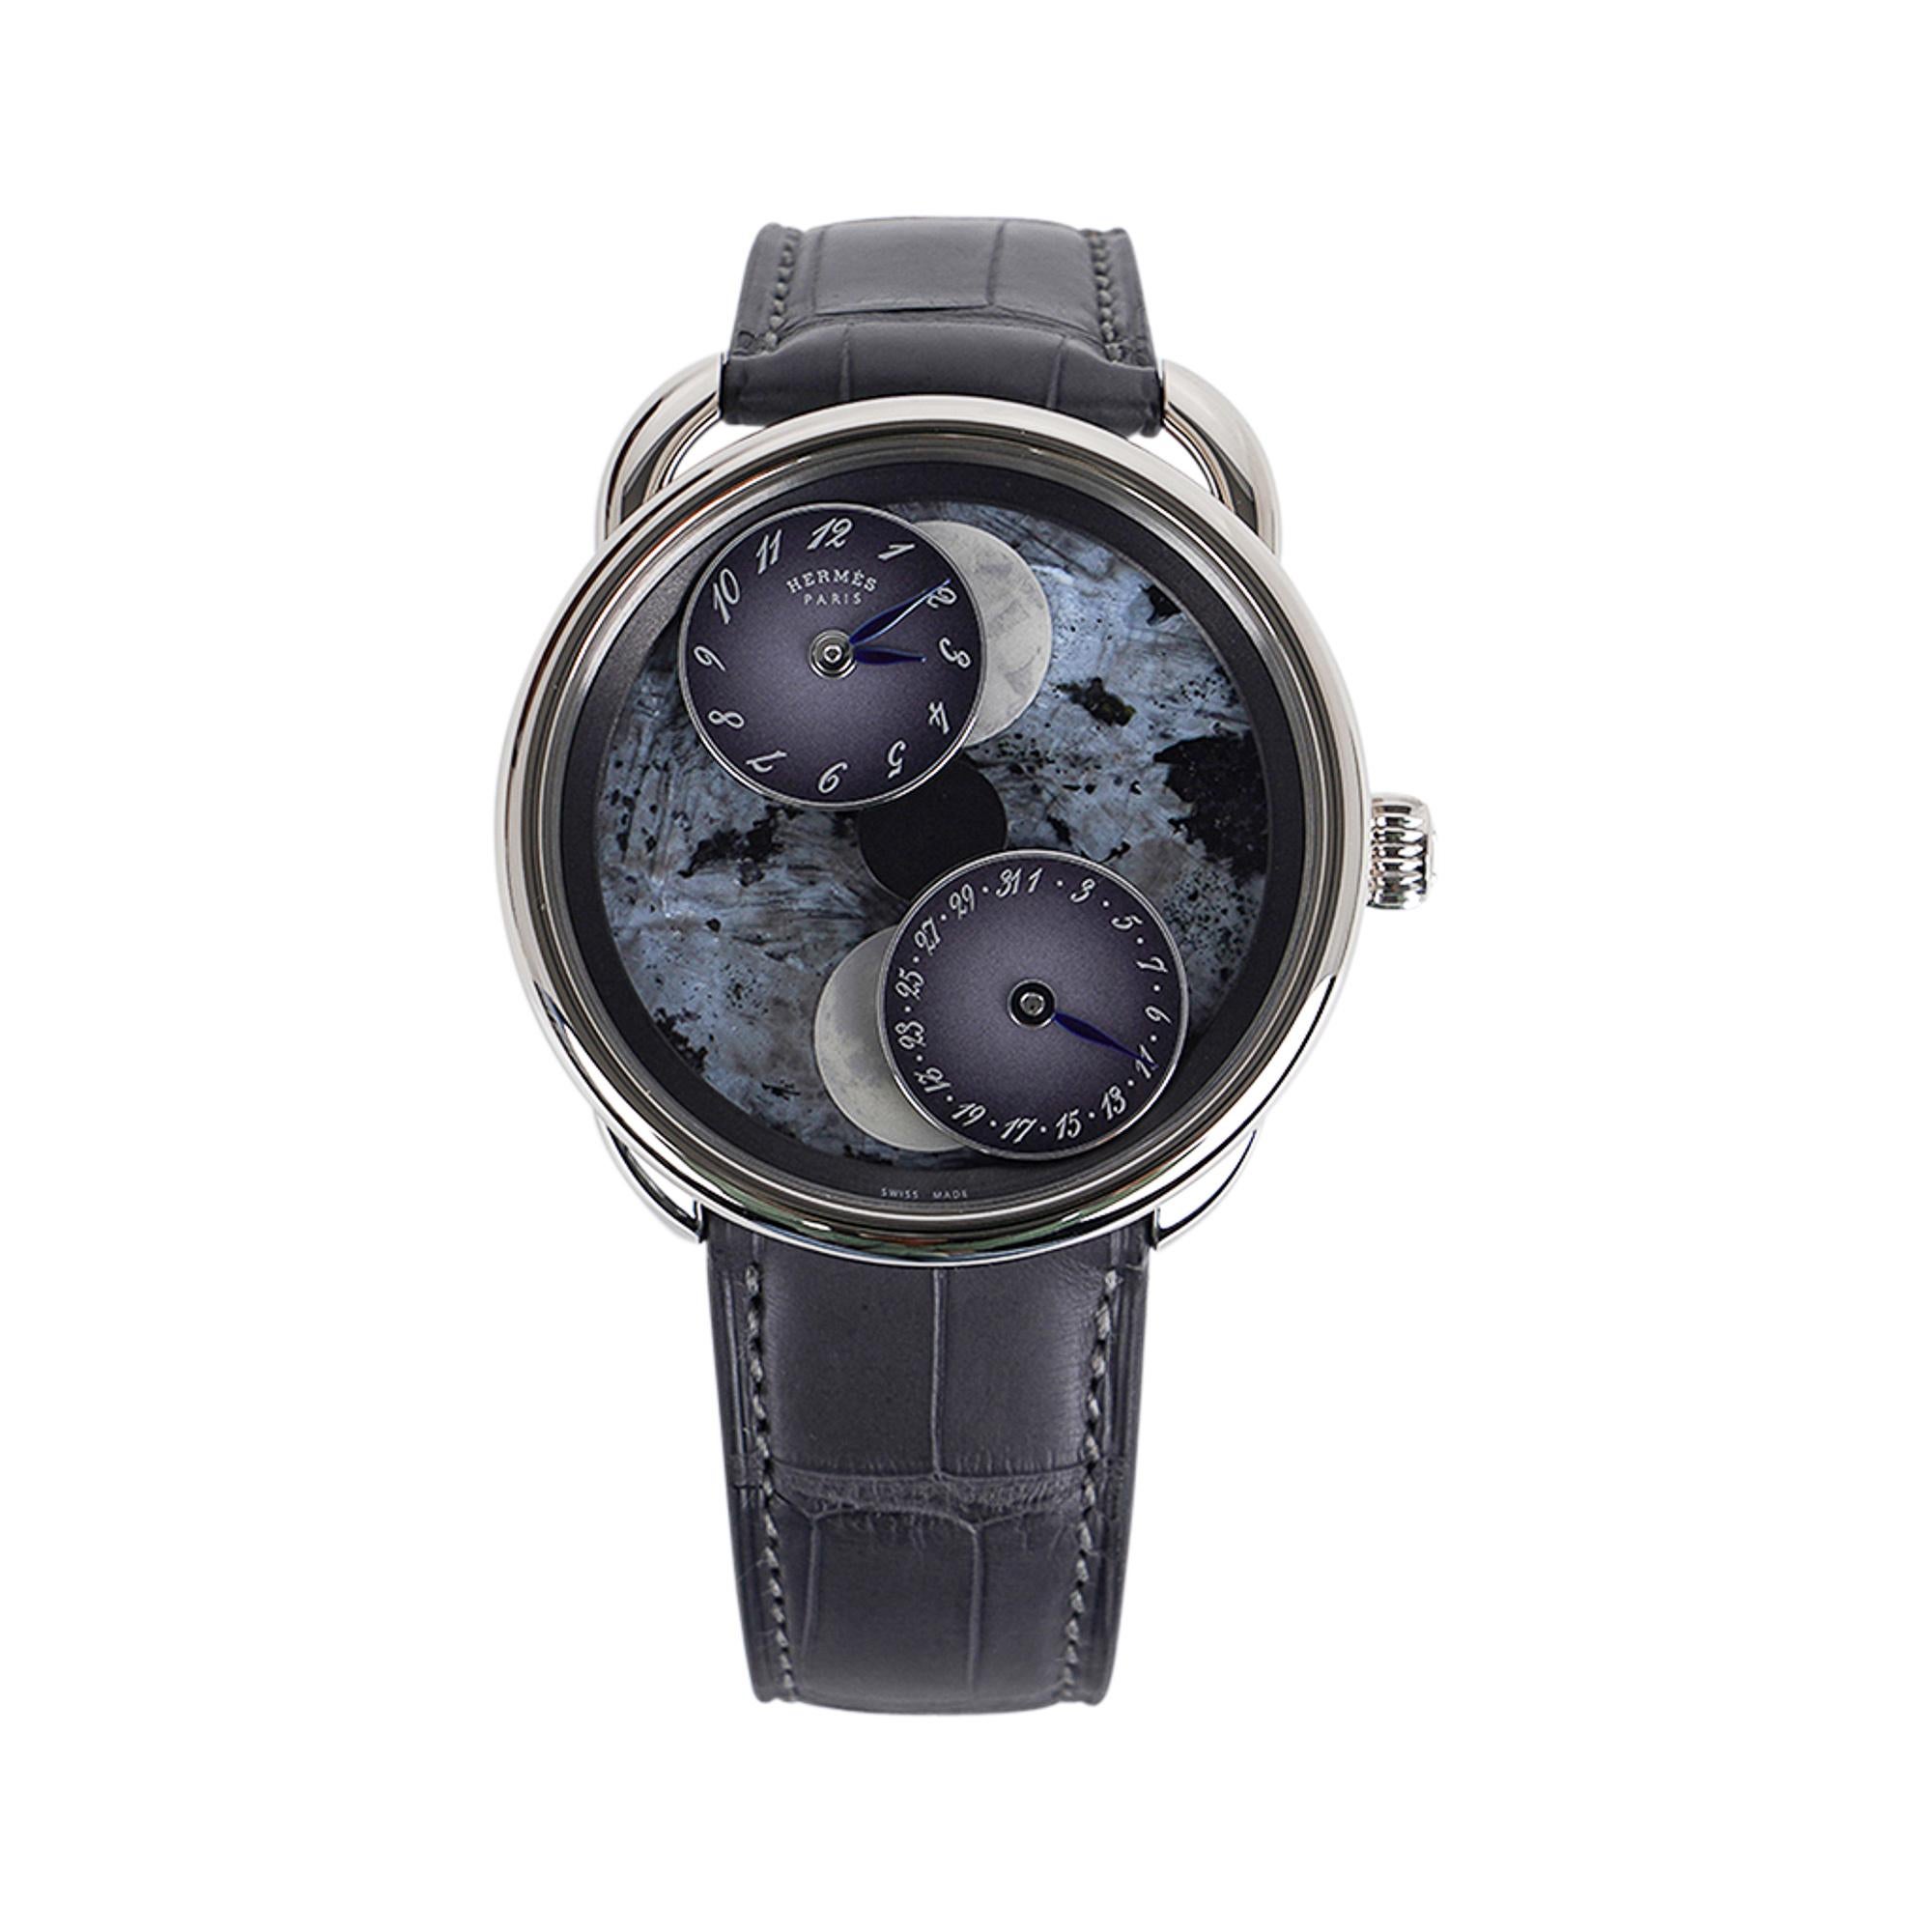 Lose yourself in space and time with this magical creation.
Mightychic offers an exquisite Hermes Limited Edition Arceau L’Heure De La Lune Only double moon phase complication watch.
Featured in Blue Pearl Stone.
Graphite Alligator strap.
The entire